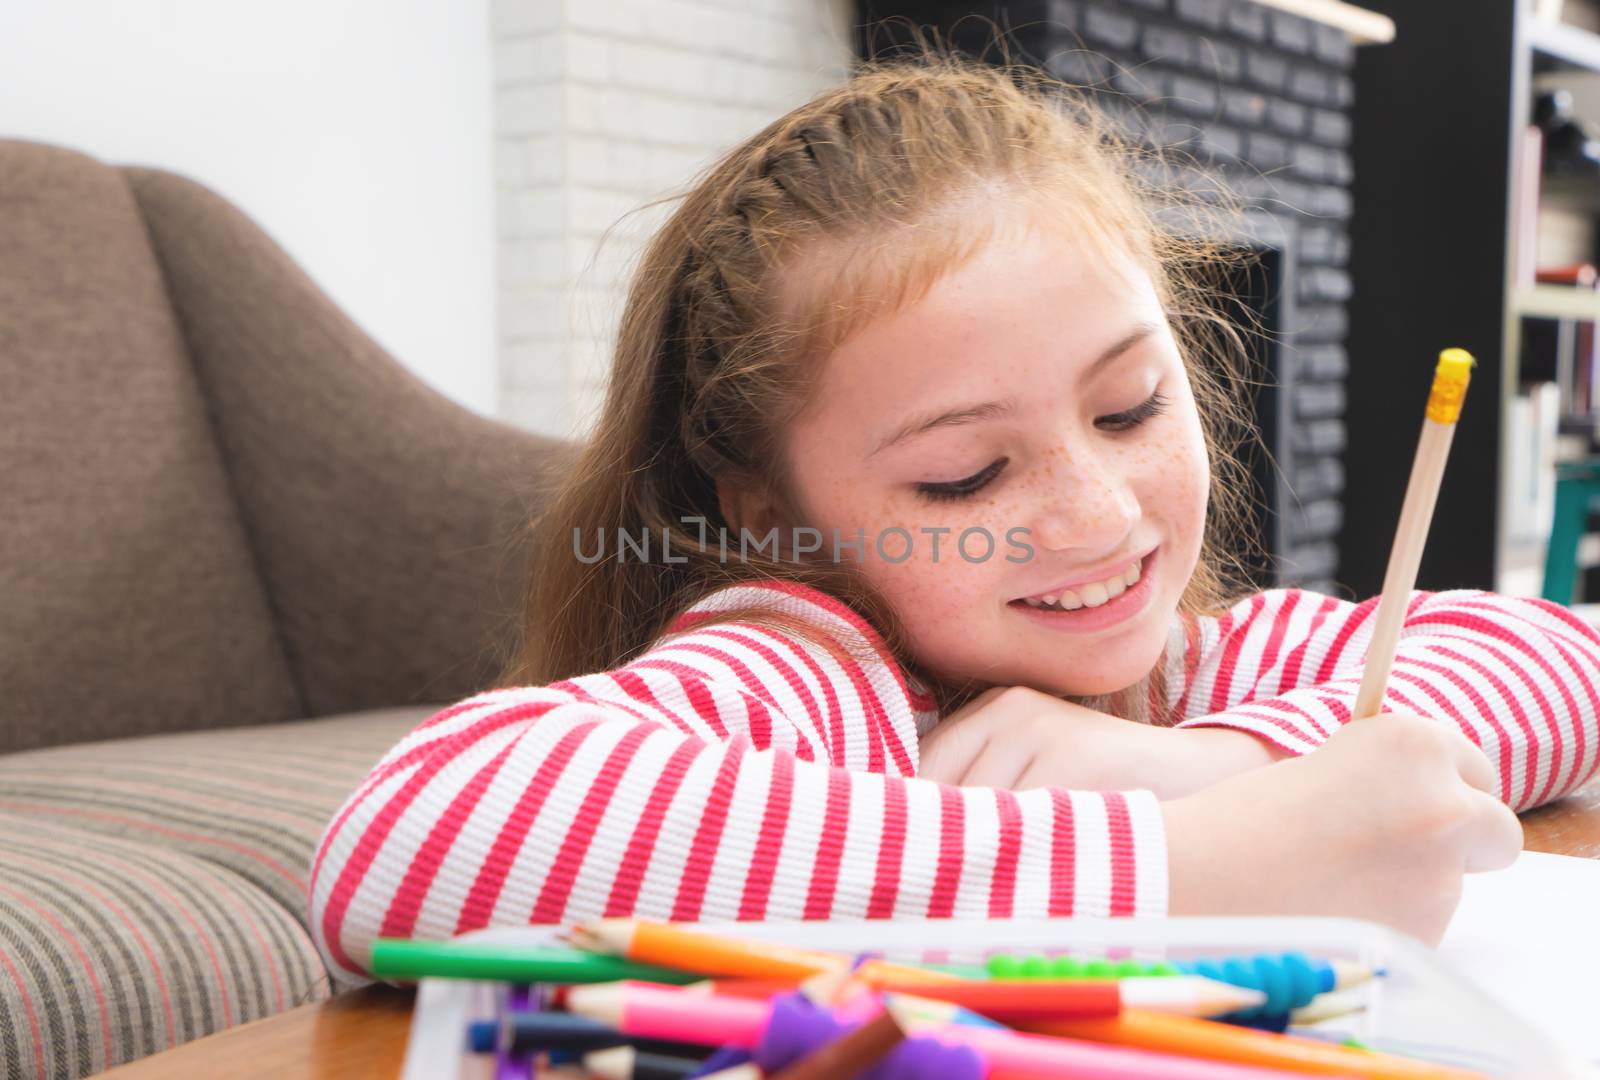 Kid Girl is pencil coloring on paper in living room